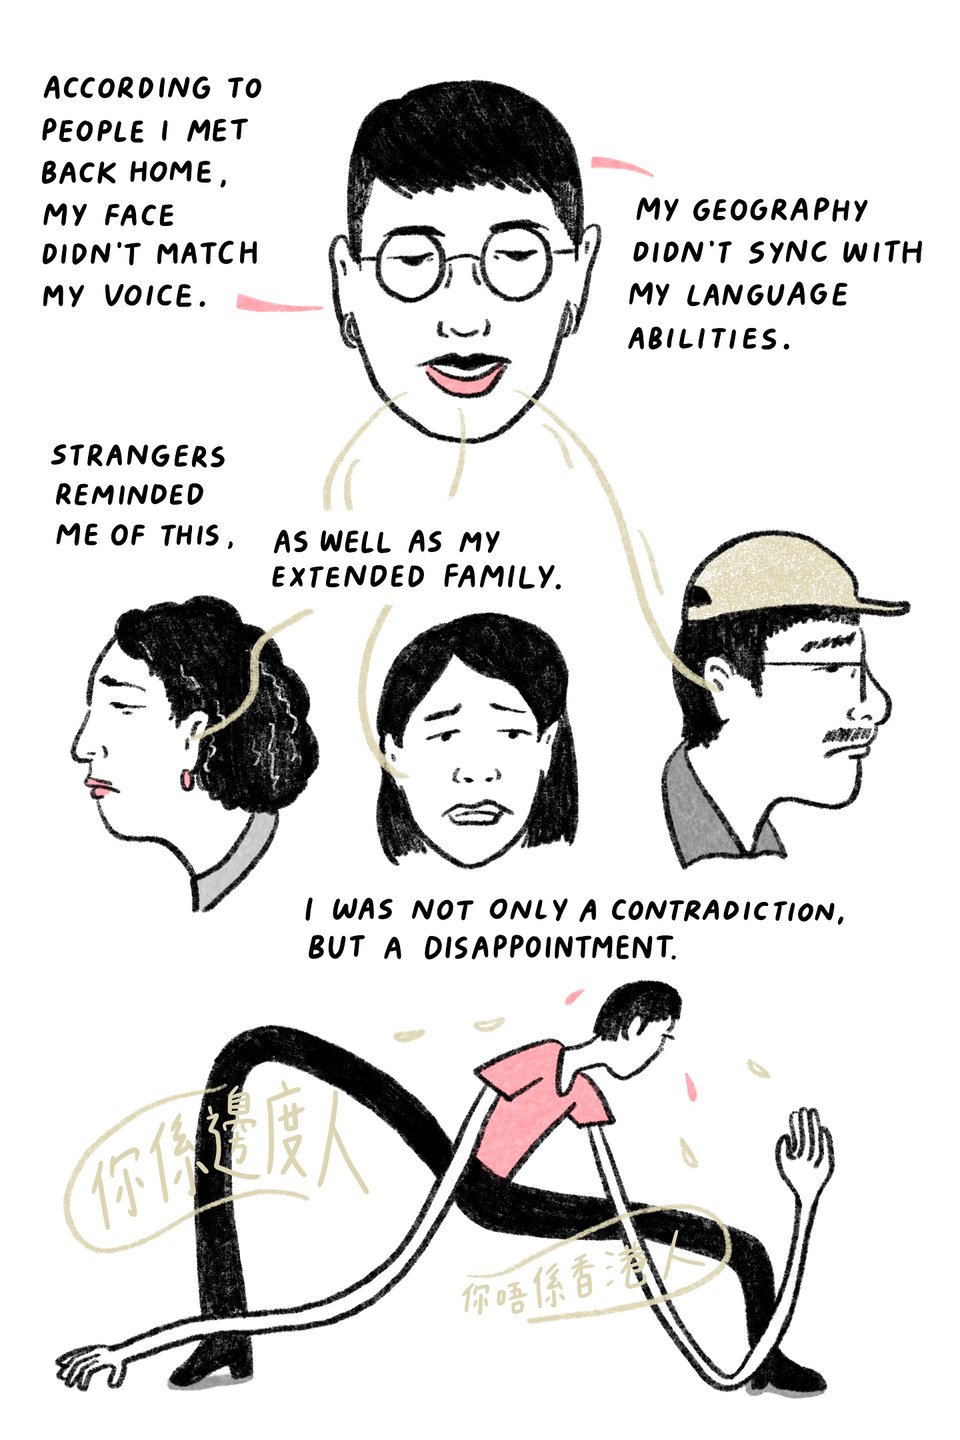 According to people I met back home, my face didn’t match my voice.  My geography didn’t sync with my language abilities. Strangers reminded me of this, as well as my extended family.  I was not only a contradiction, but a disappointment.